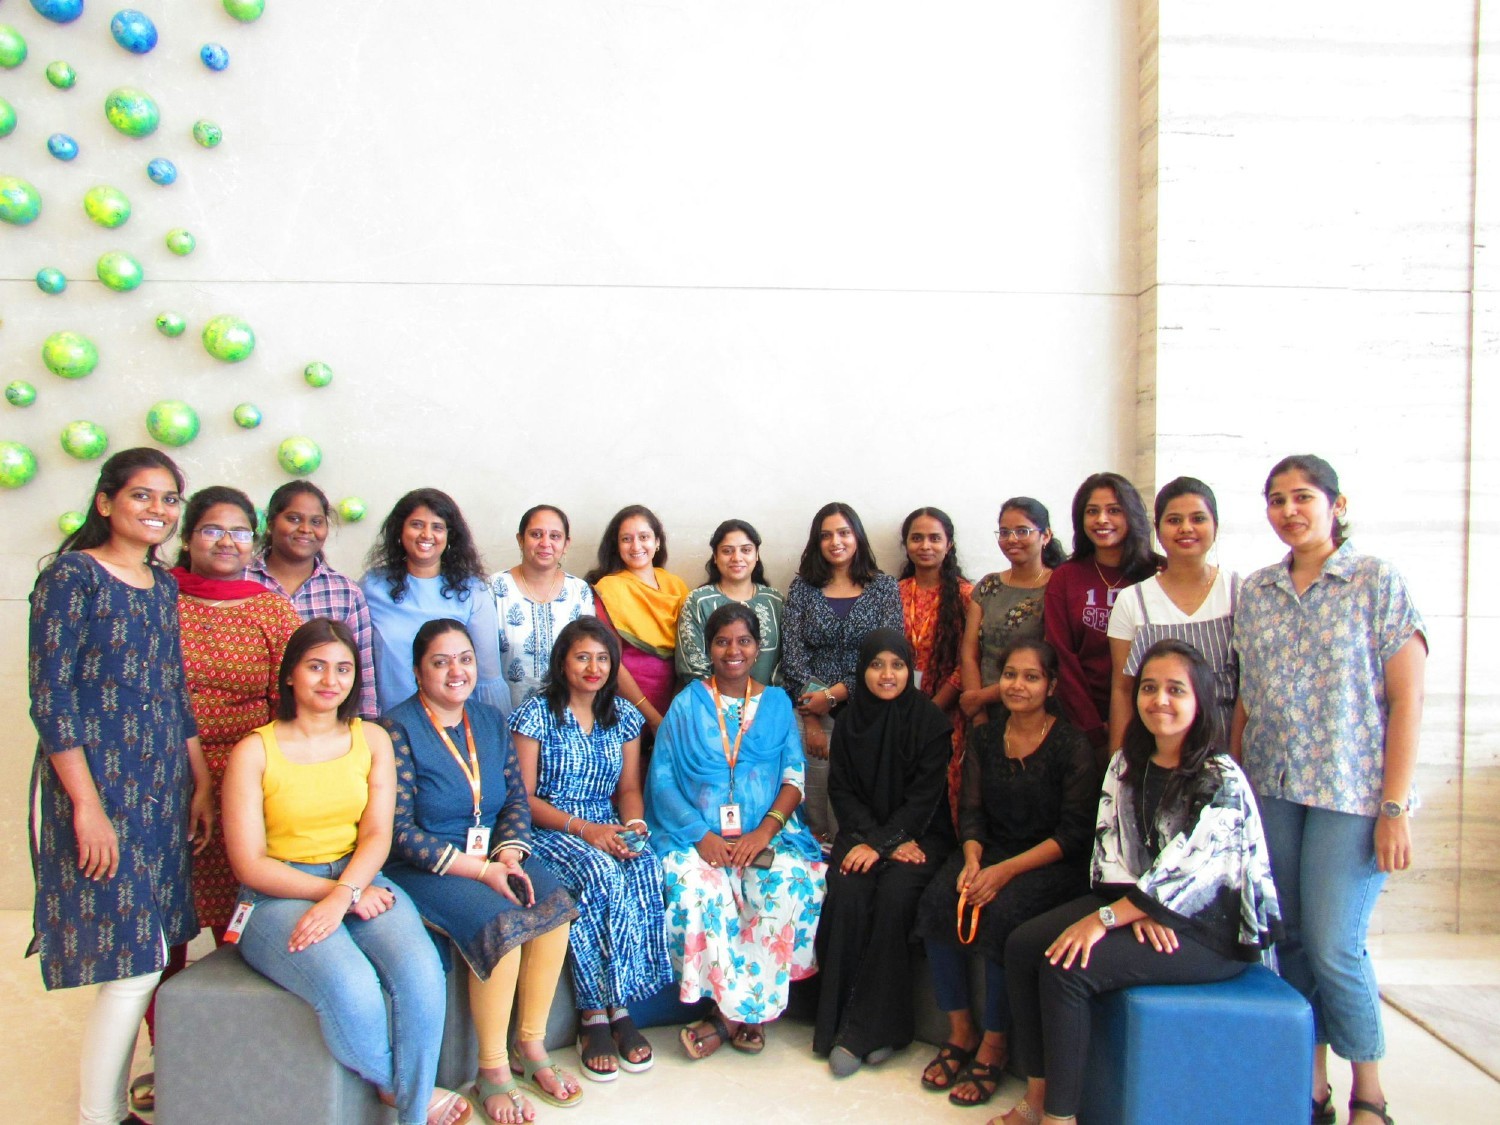 Here’s to the Women in Tech bringing in talent, determination and diversity at Feuji.